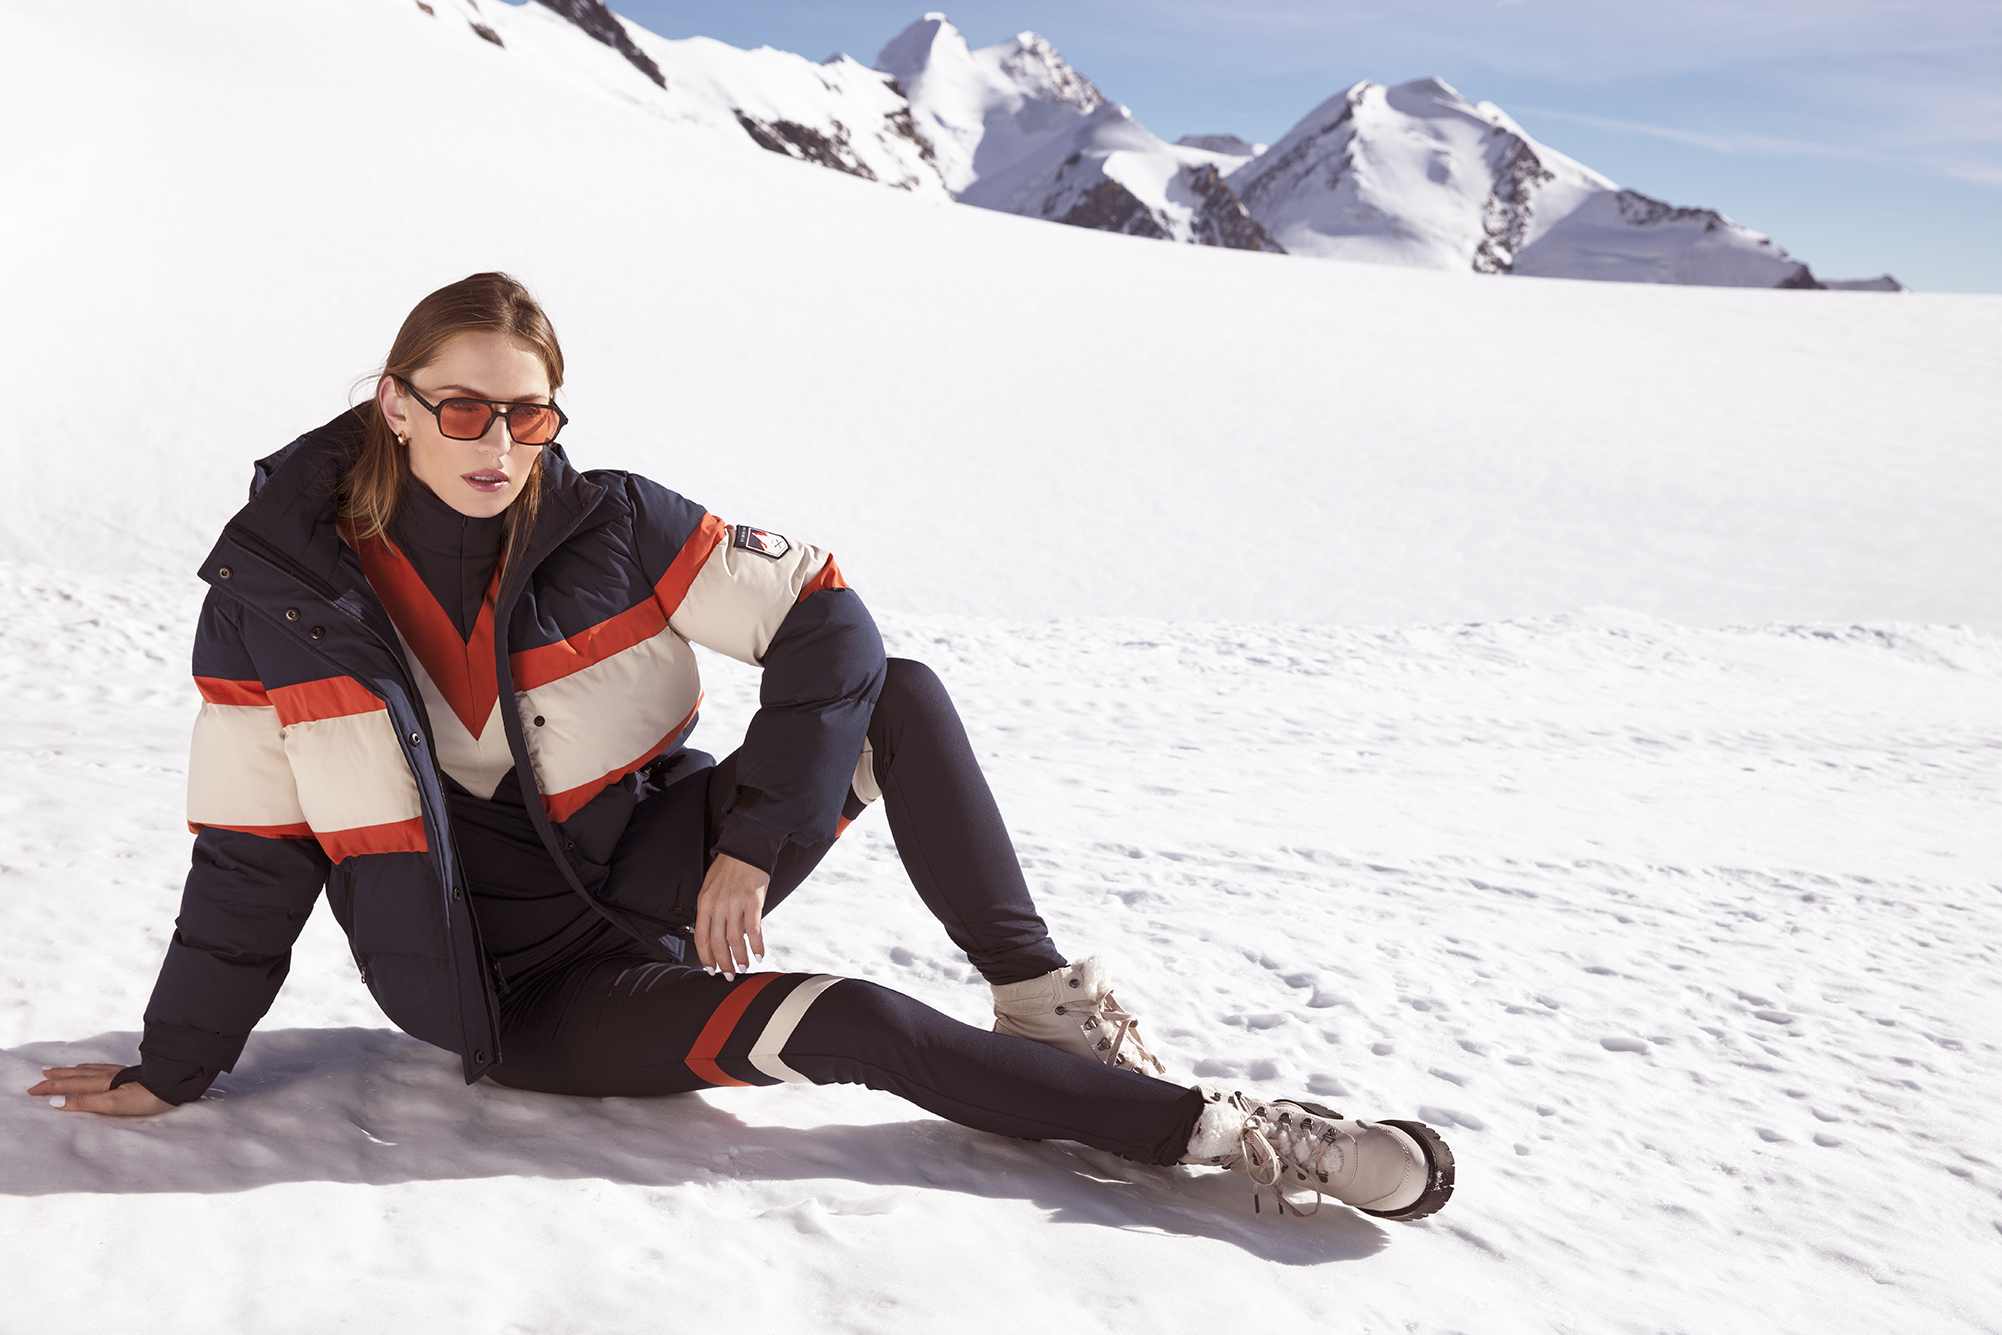 Why The Ski Capsule from By Malina is the ultimate ski collection you need for winter 21/22. 78